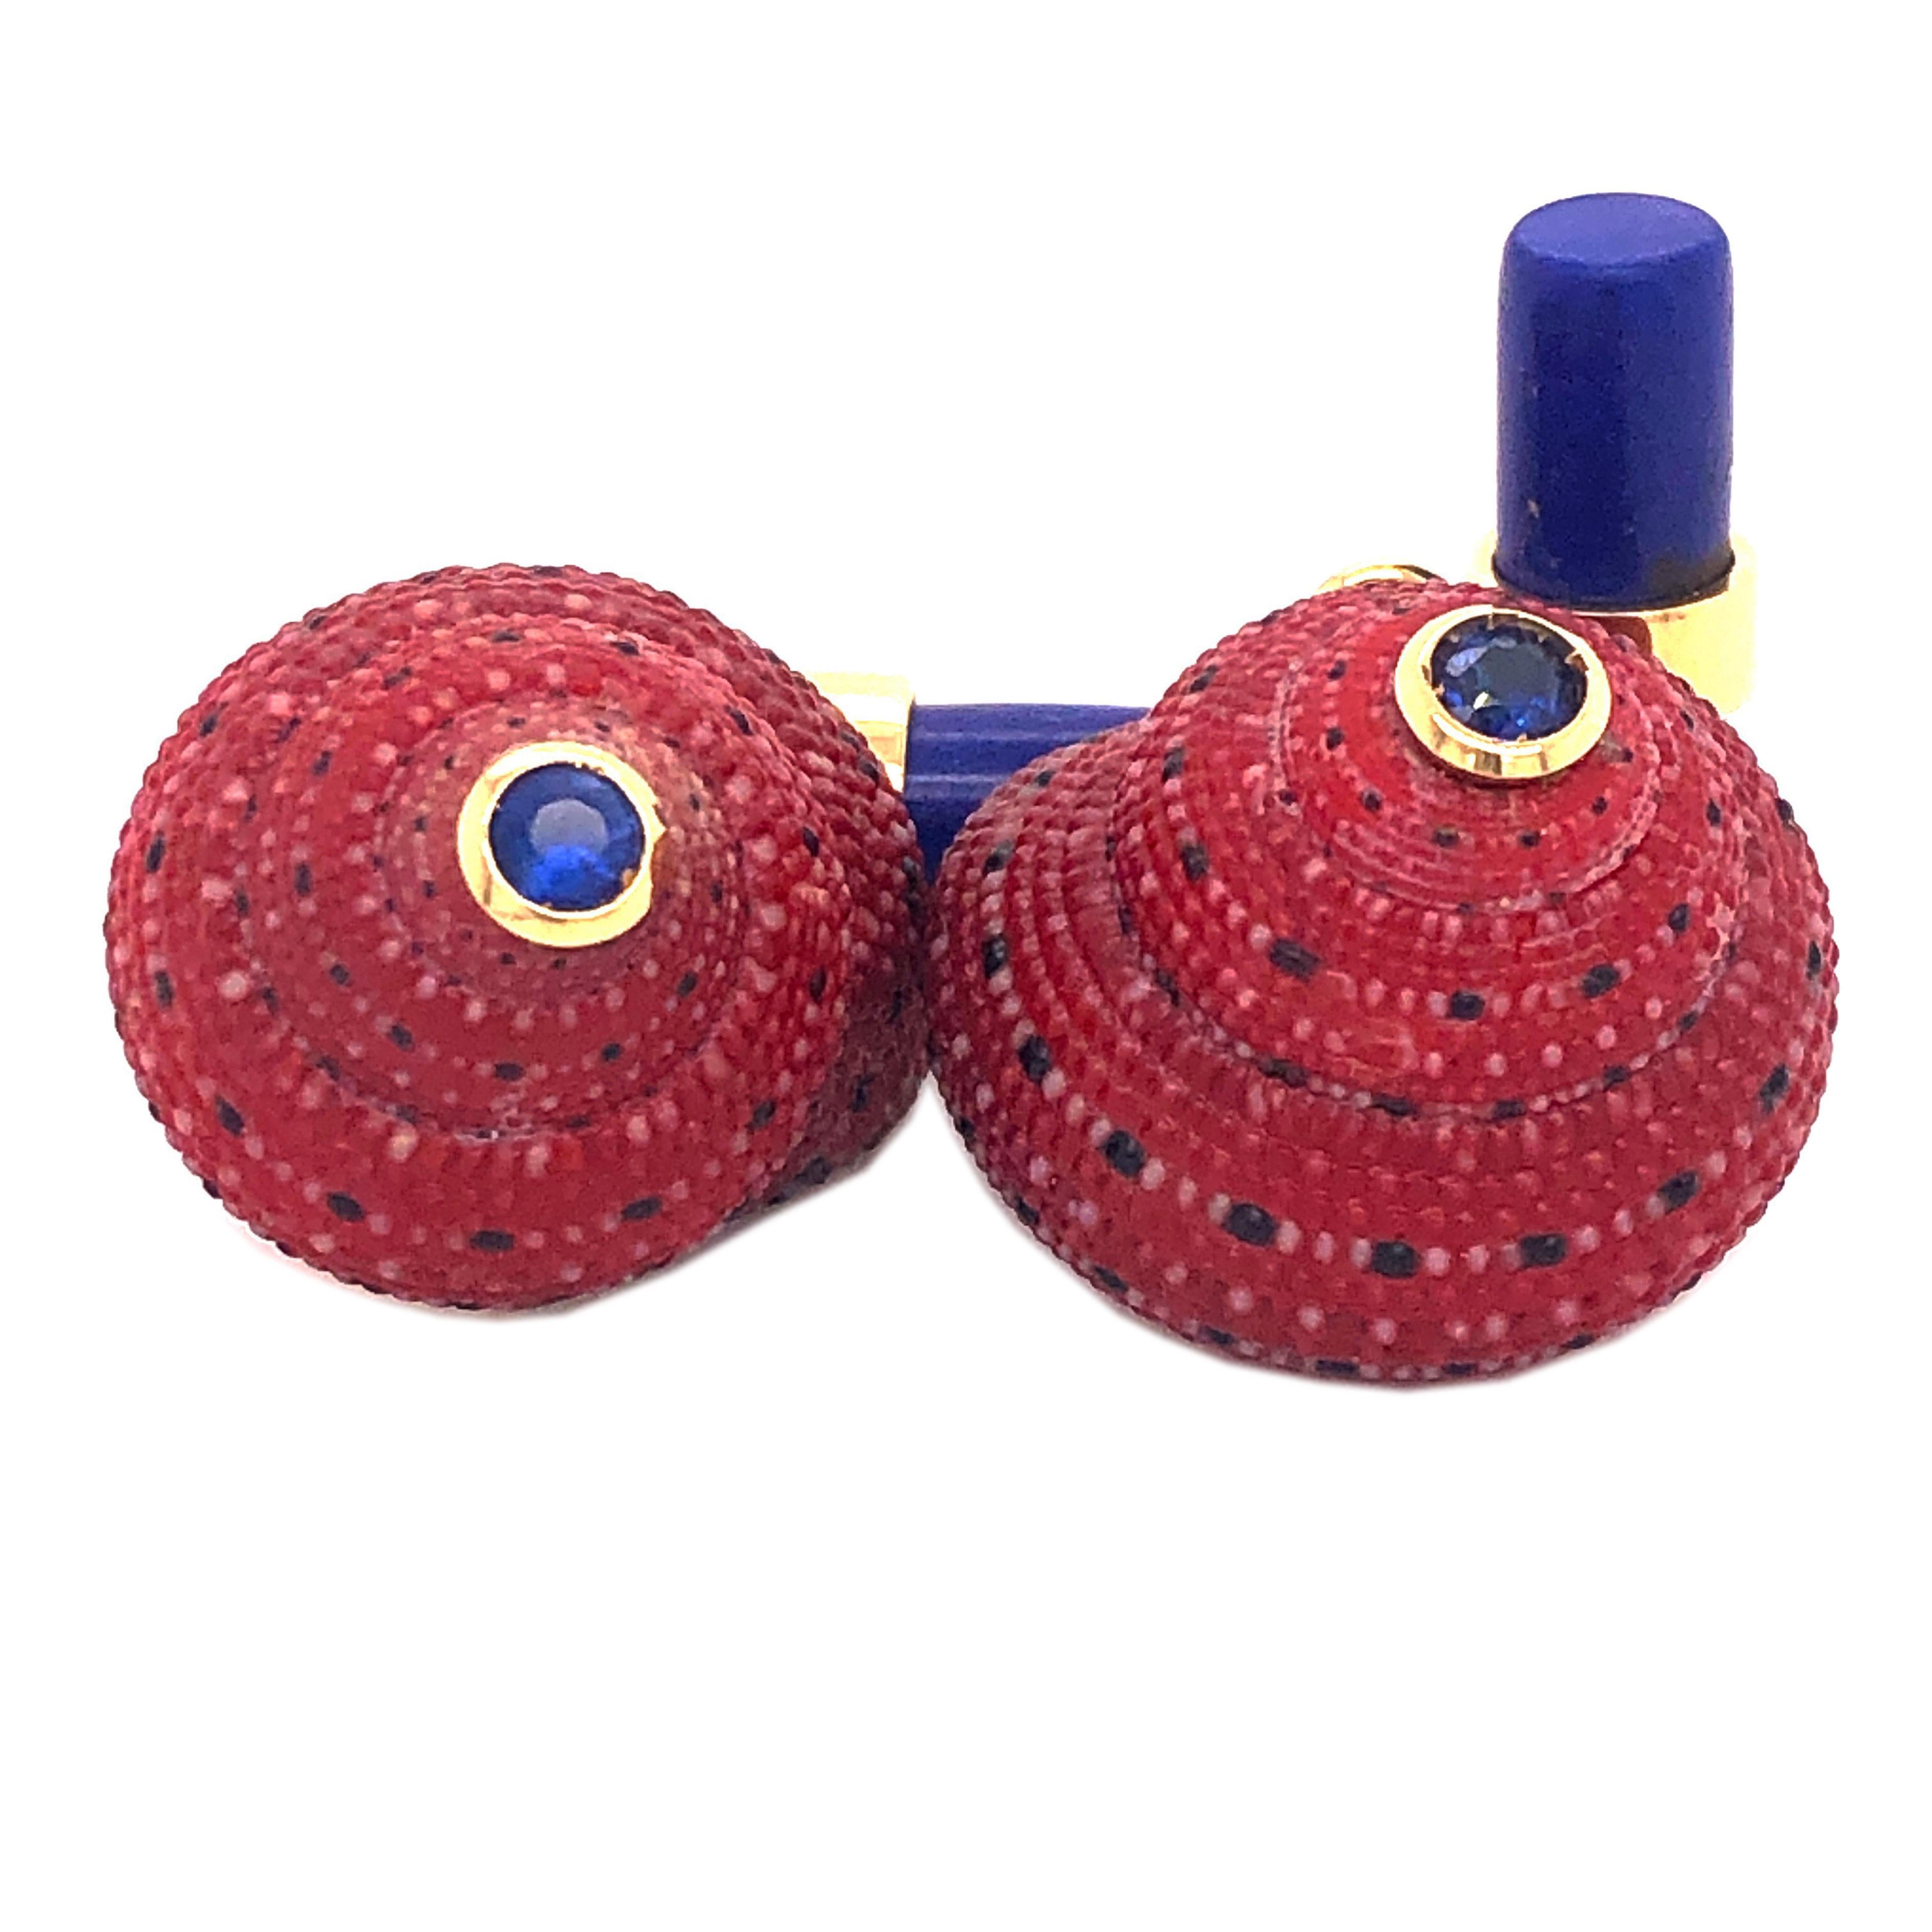 Unique and one-of-a-kind pair of cufflinks featuring 0.30Kt Natural Blue Brilliant Cut Sapphire in a Straberry Red Shell 18Kt Yellow Gold Setting. White Mother-of-Pearl Hand Enamel on the shell's back. A chic Hand Inlaid Natural Lapis-Lazuli baton